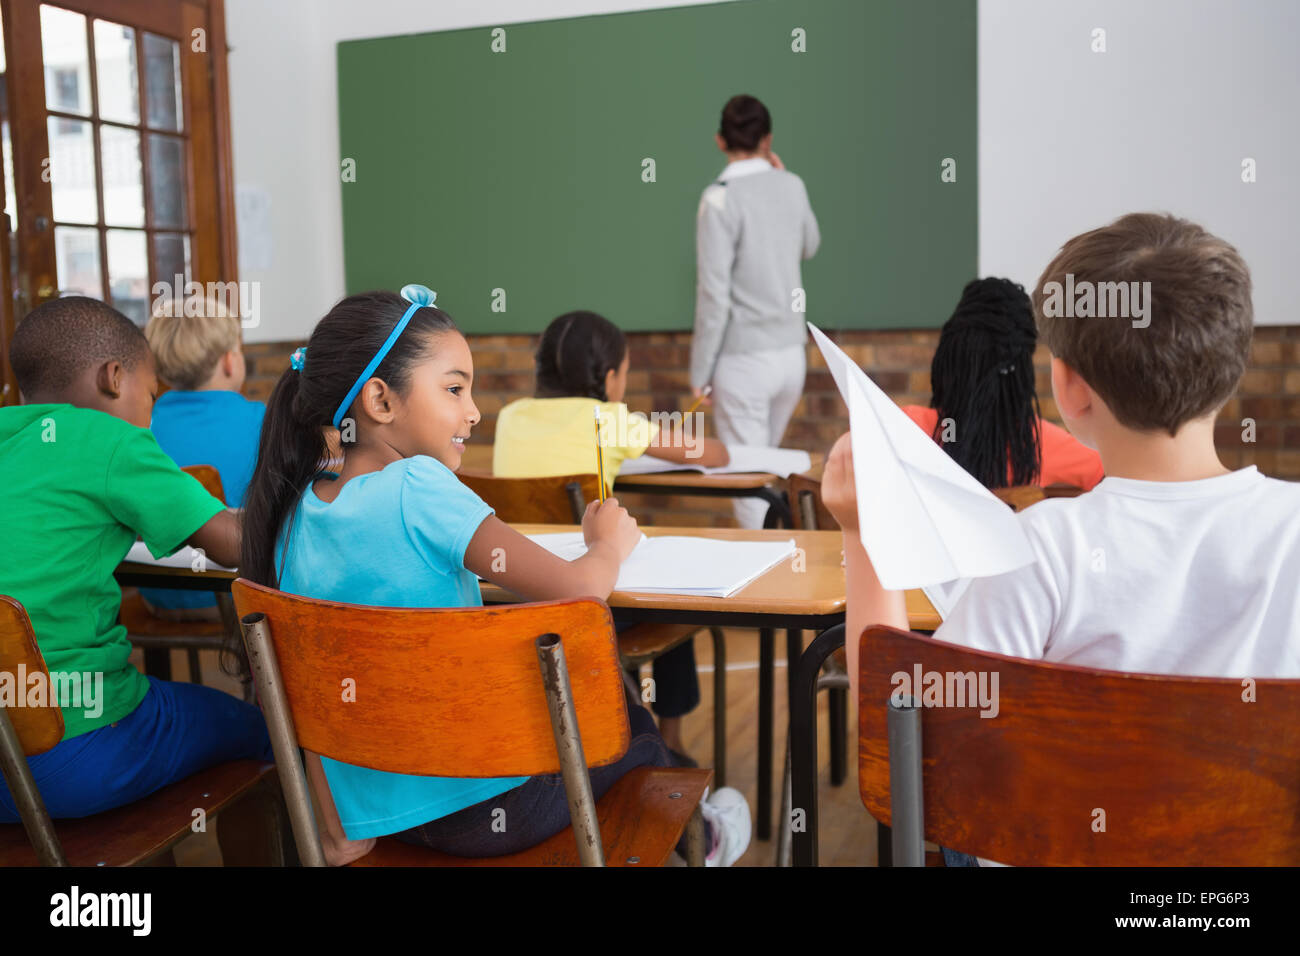 Naughty pupil about to throw paper airplane in class Stock Photo